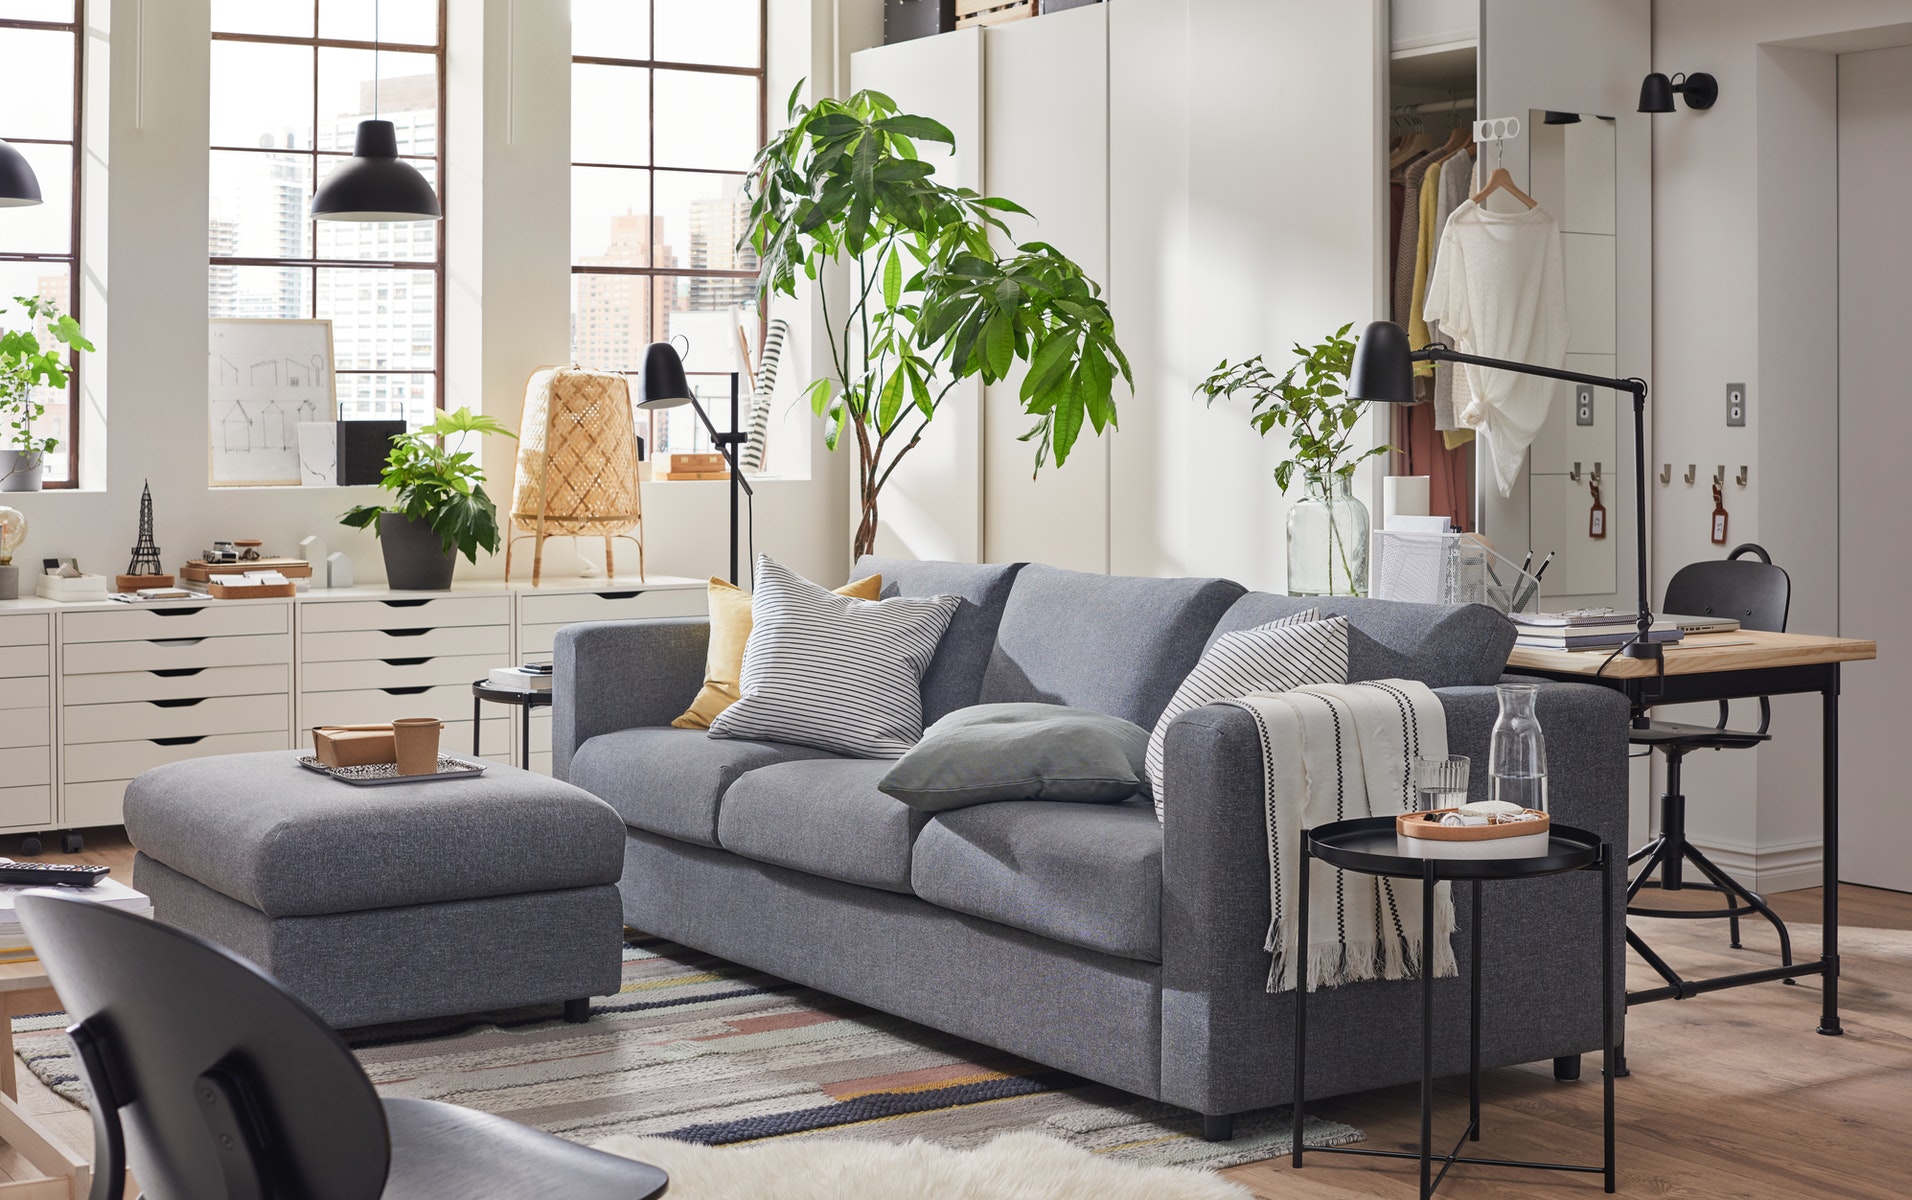 Top 5 Brands to Buy Furniture in the World